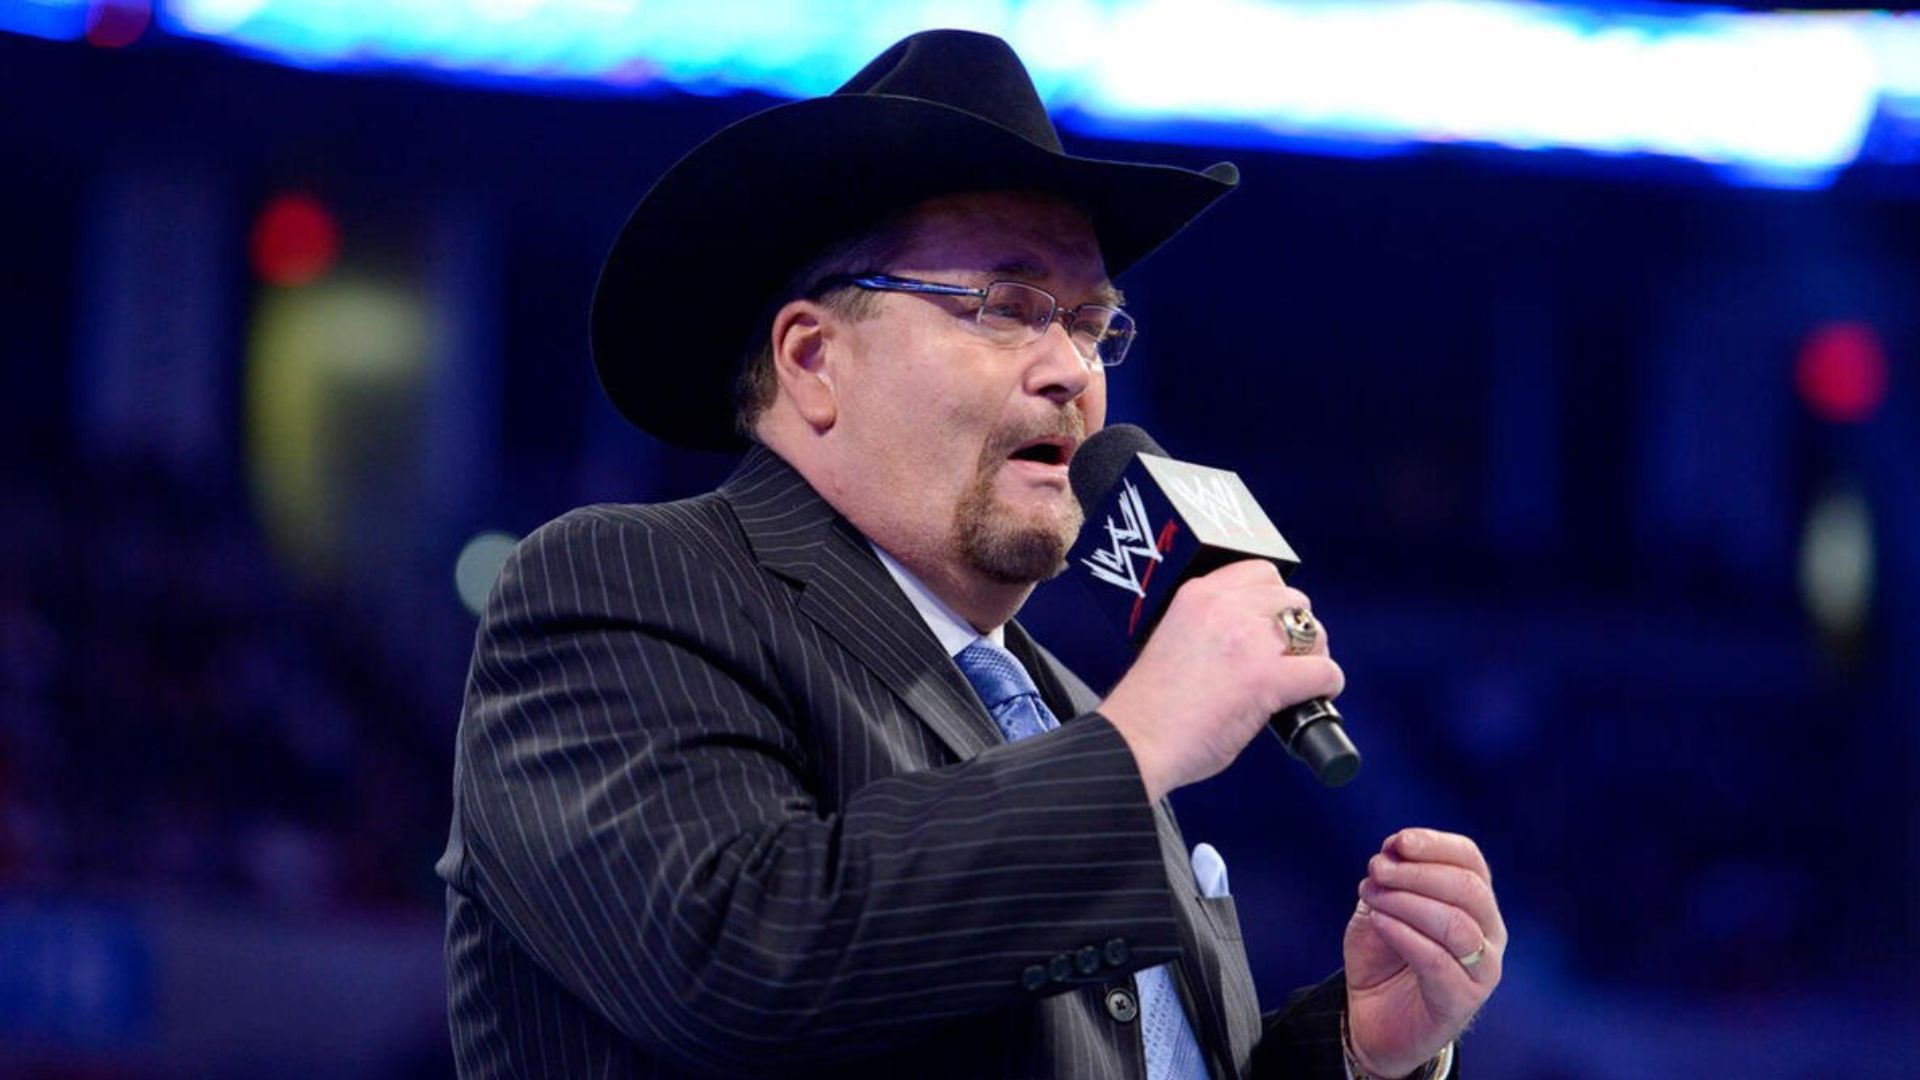 Jim Ross is a legendary broadcaster in the professional wrestling business. [Photo: WWE.com]